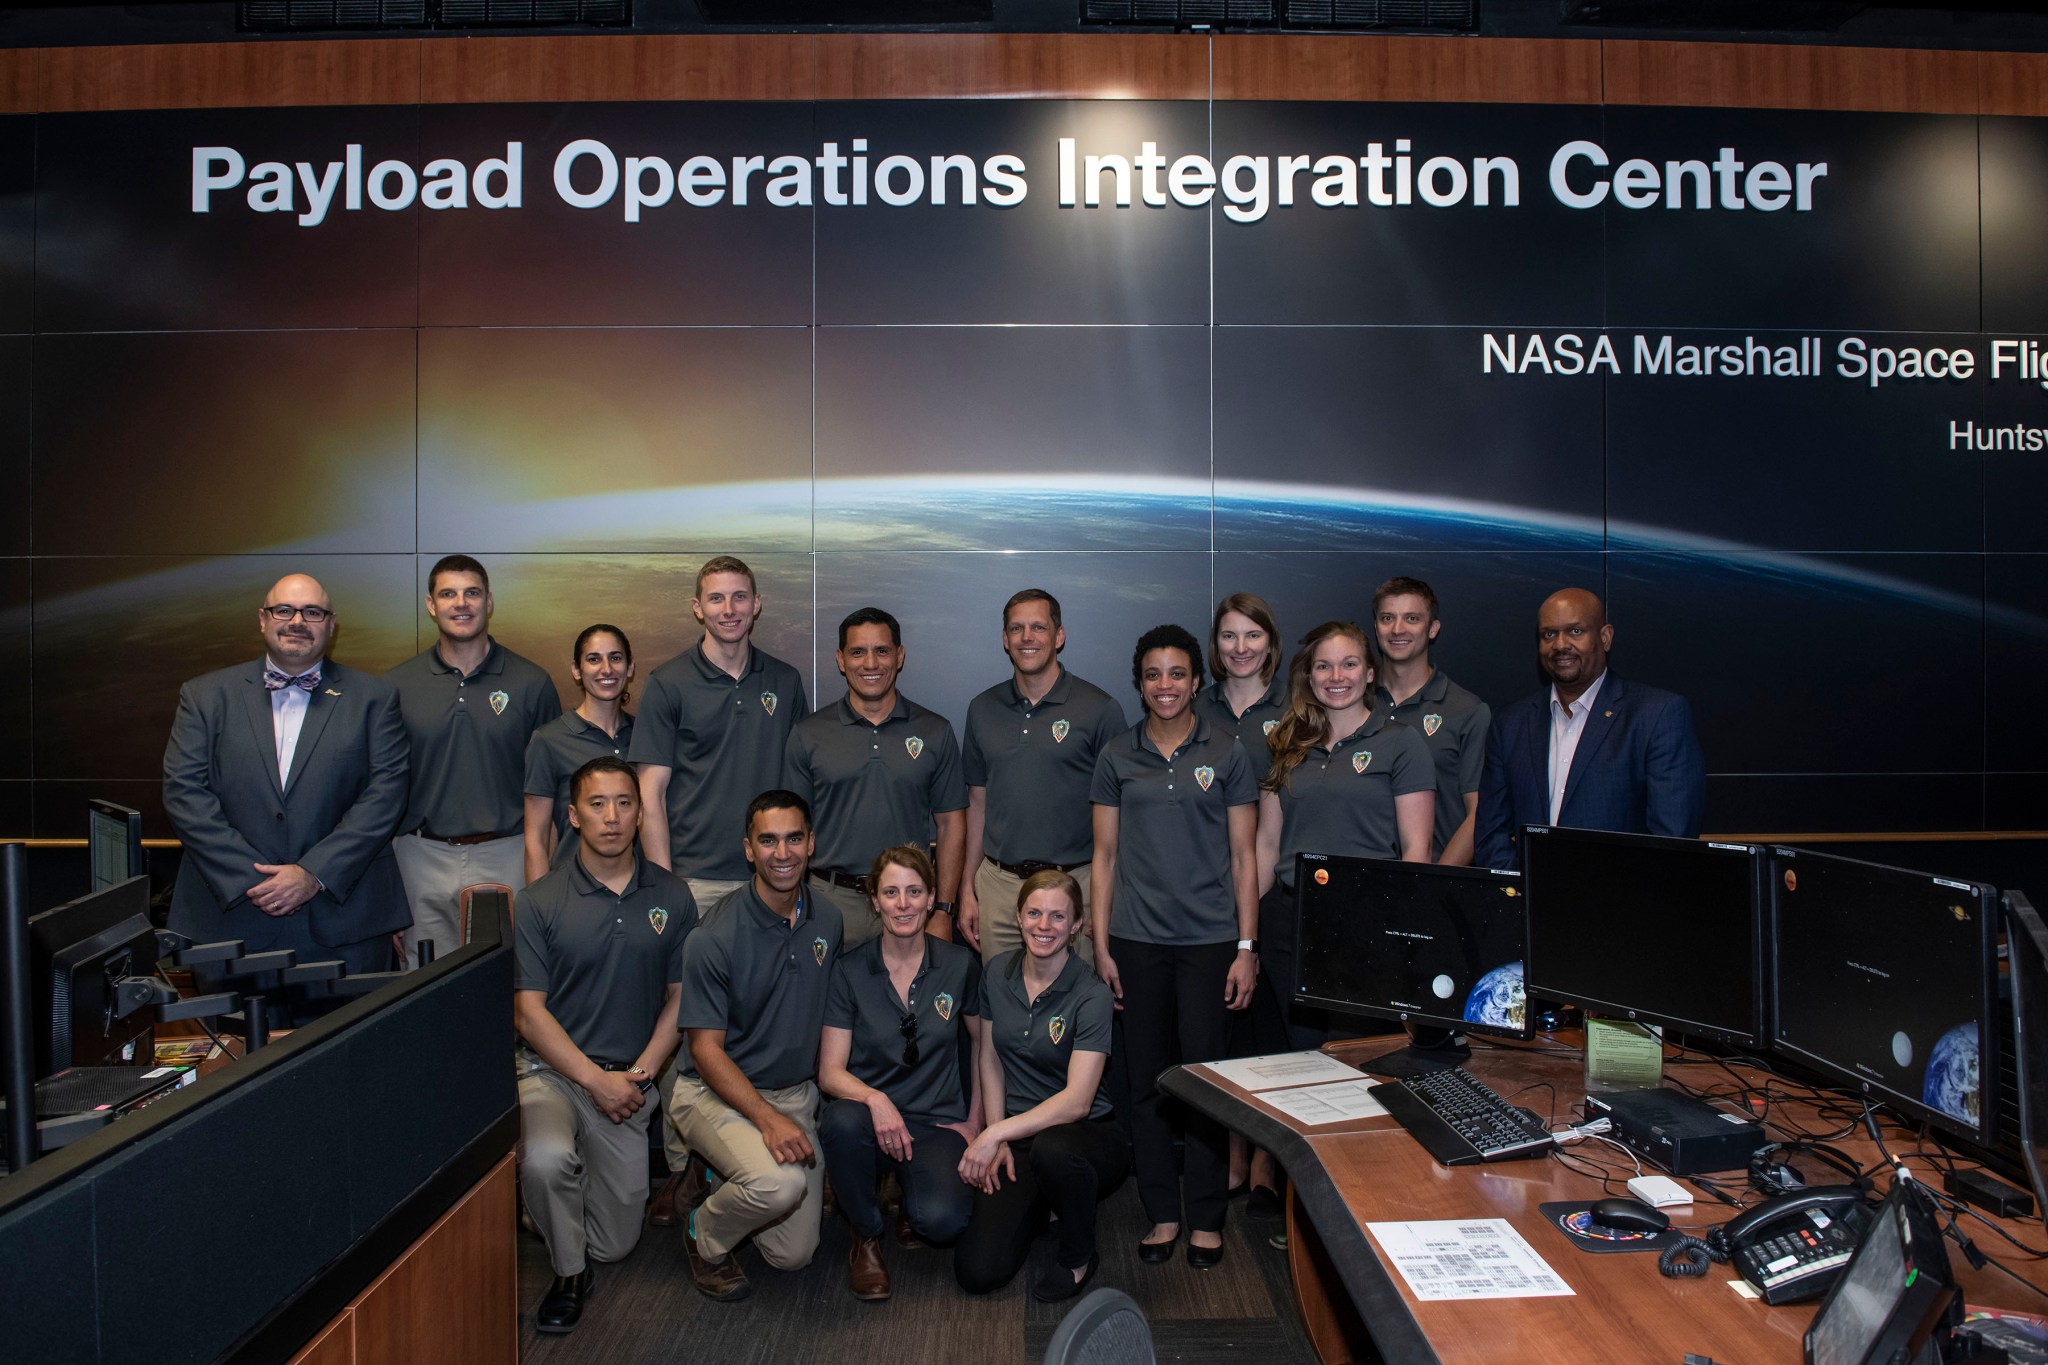 NASA’s newest astronaut candidates from the class of 2017 visit the Payload Operations Integration Center.